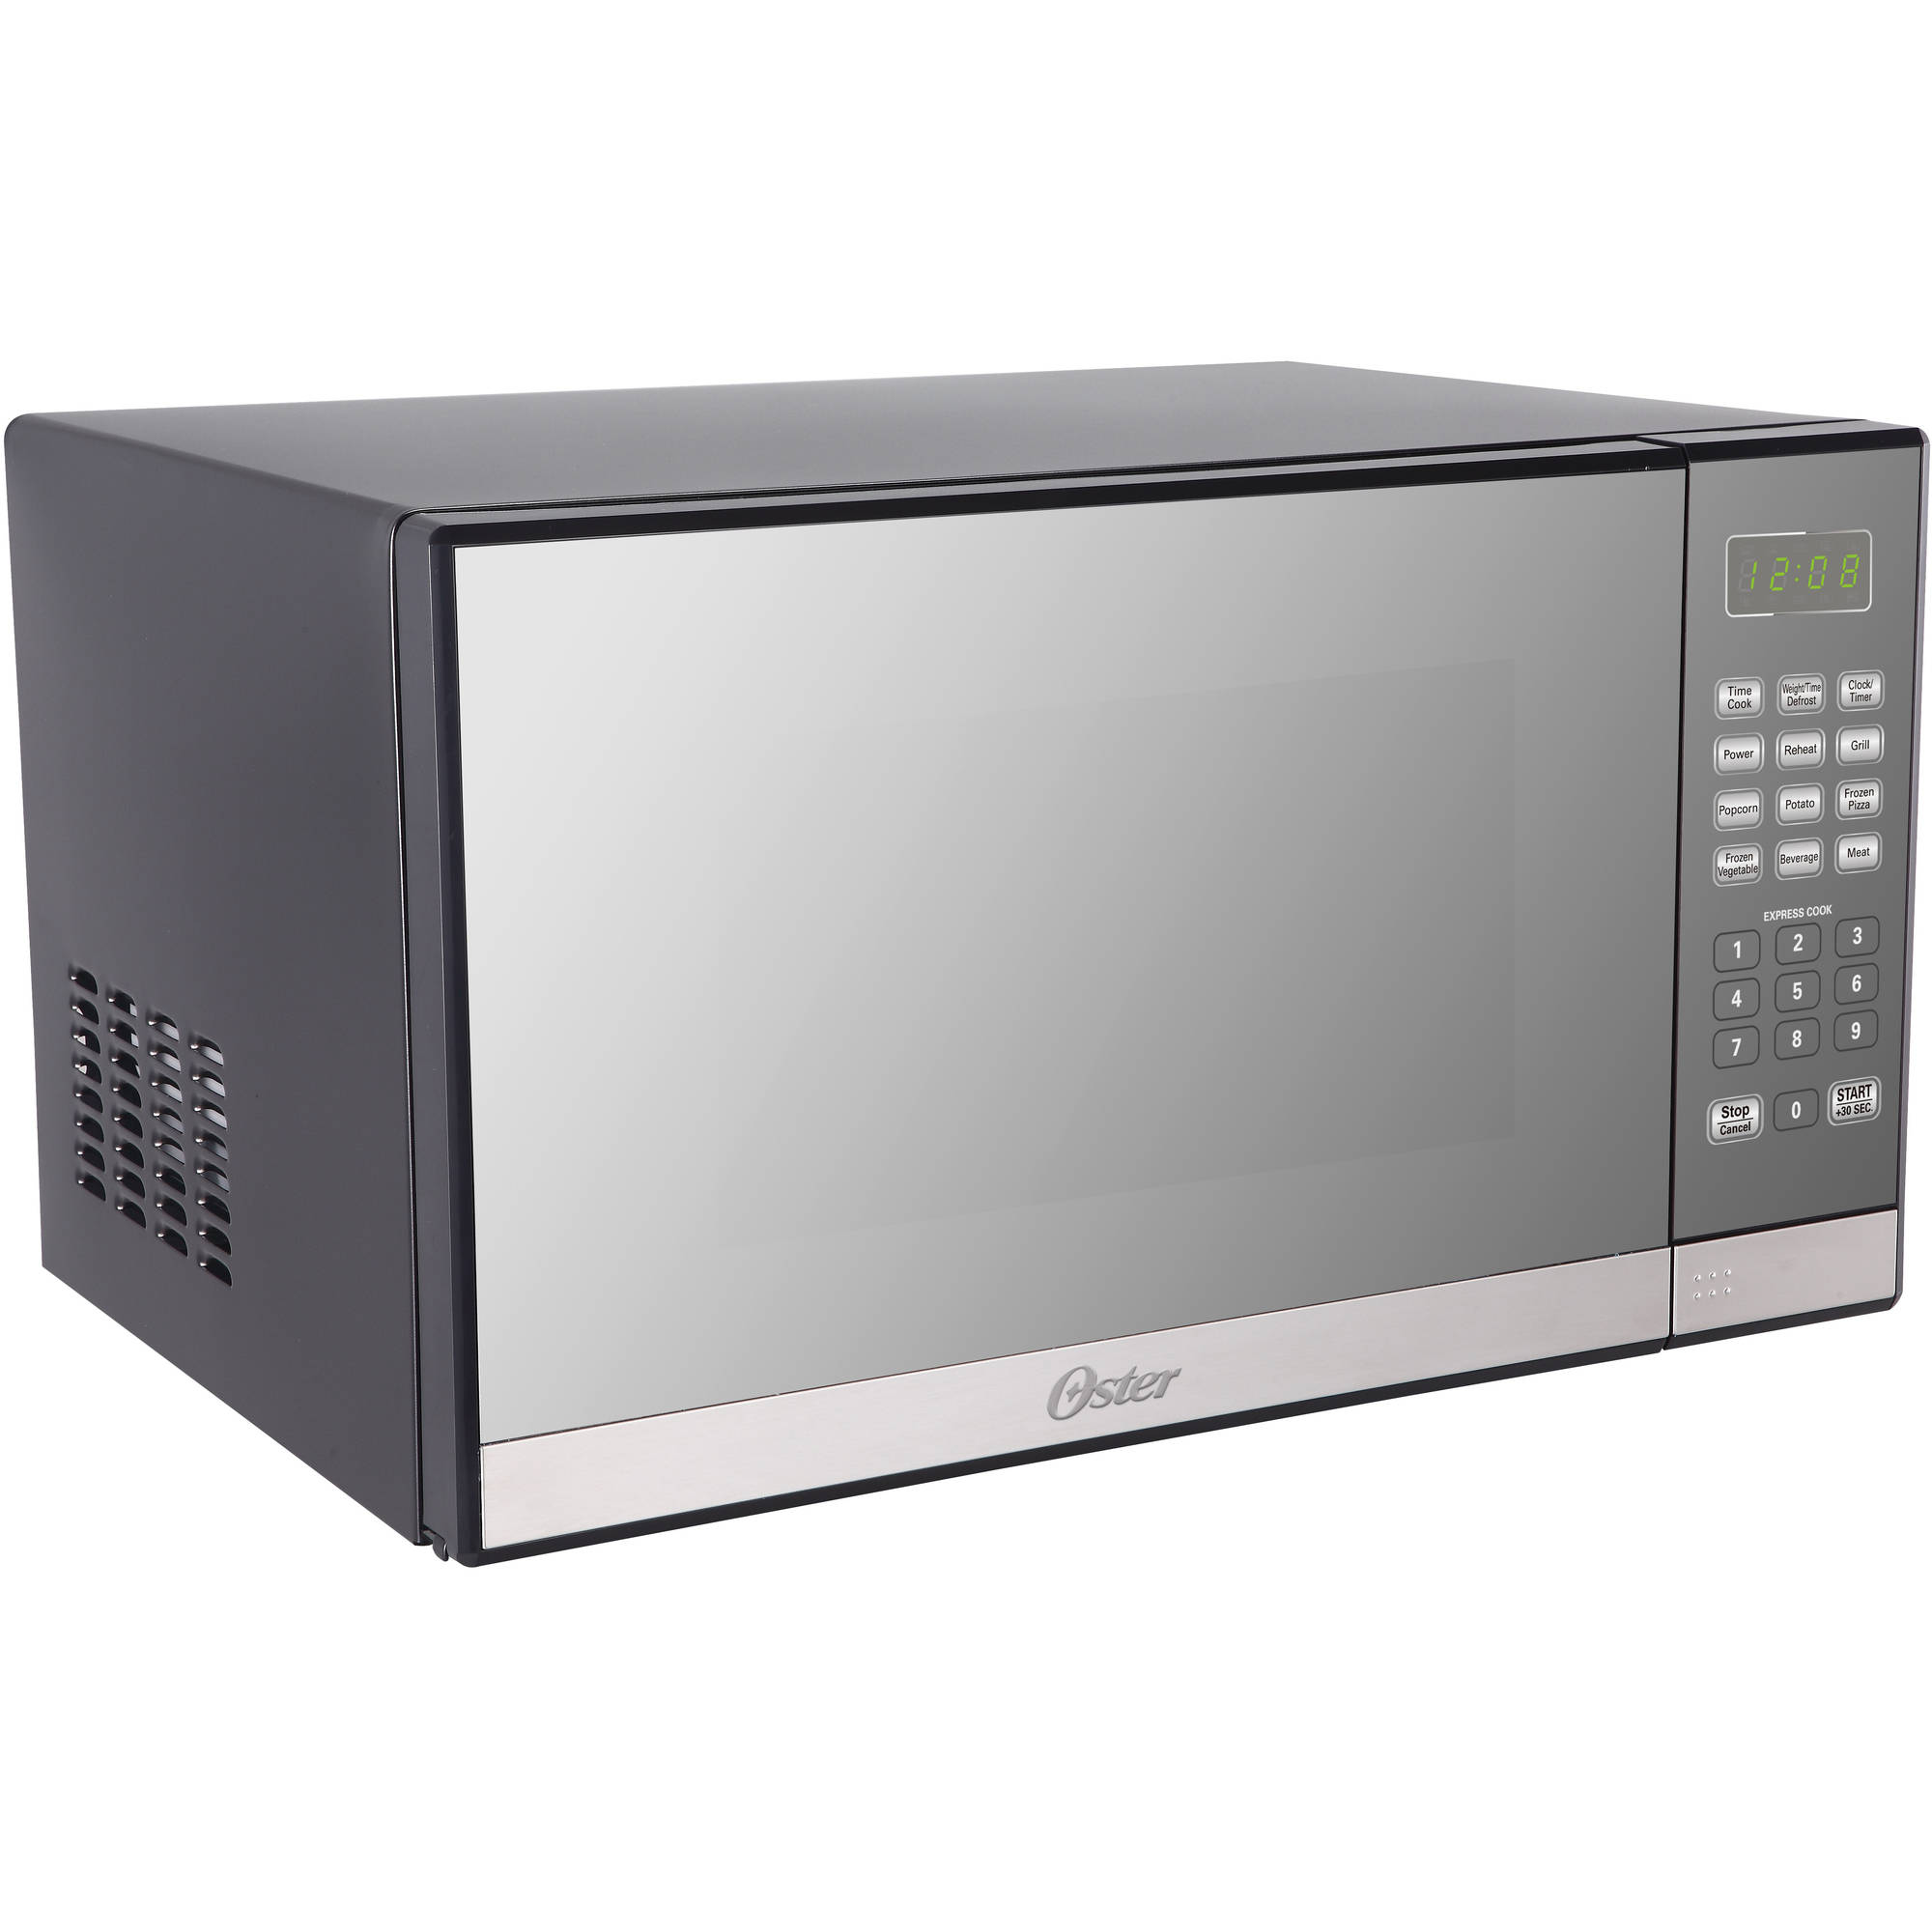 Oster 1.3 Cu. ft. Stainless Steel with Mirror Finish Microwave Oven with Grill - image 3 of 4